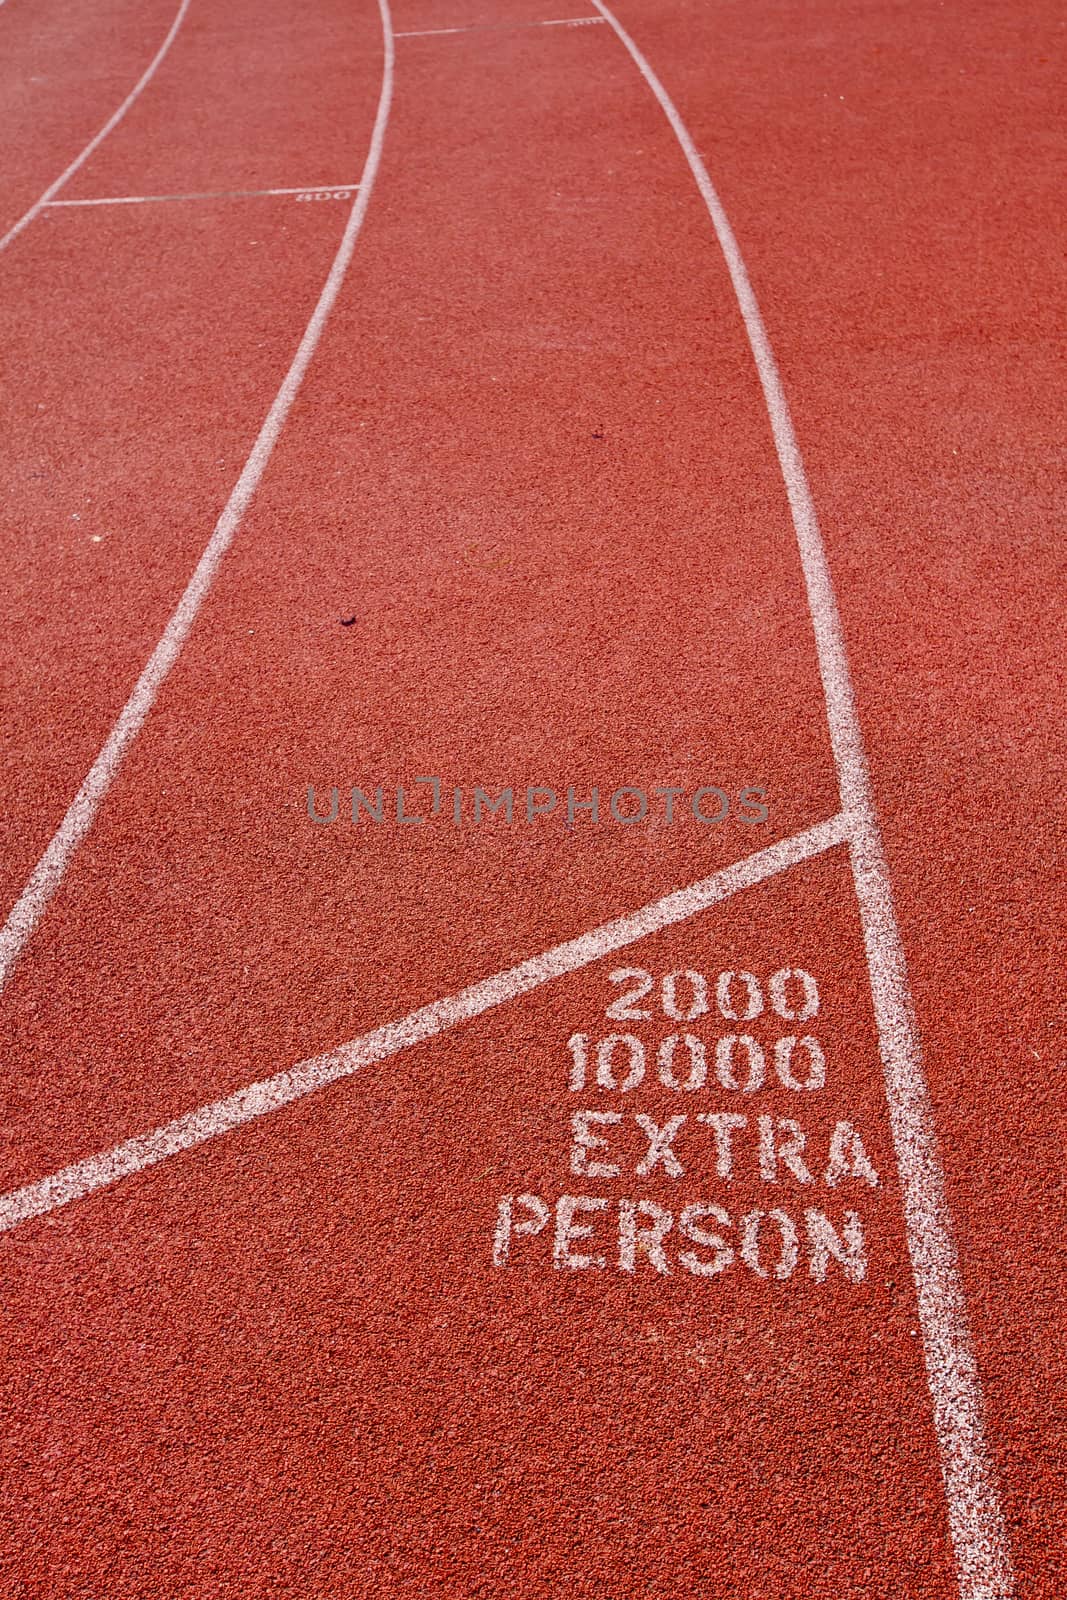 Running track for the athletes background